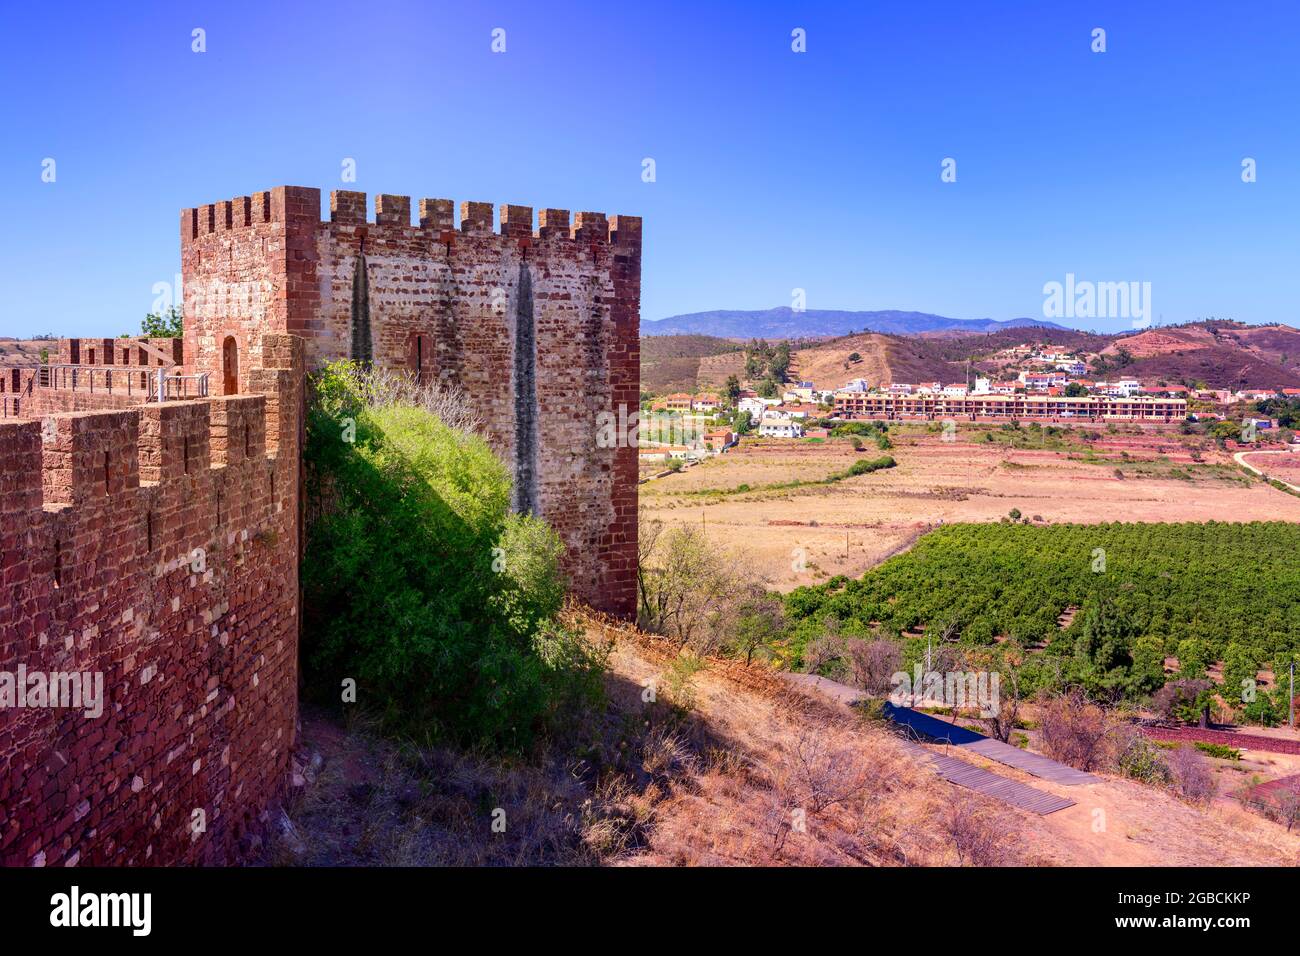 Square tower and battlements of Silves castle set against the surrounding hills, countryside and blue sky. Silves Algarve Portugal Stock Photo